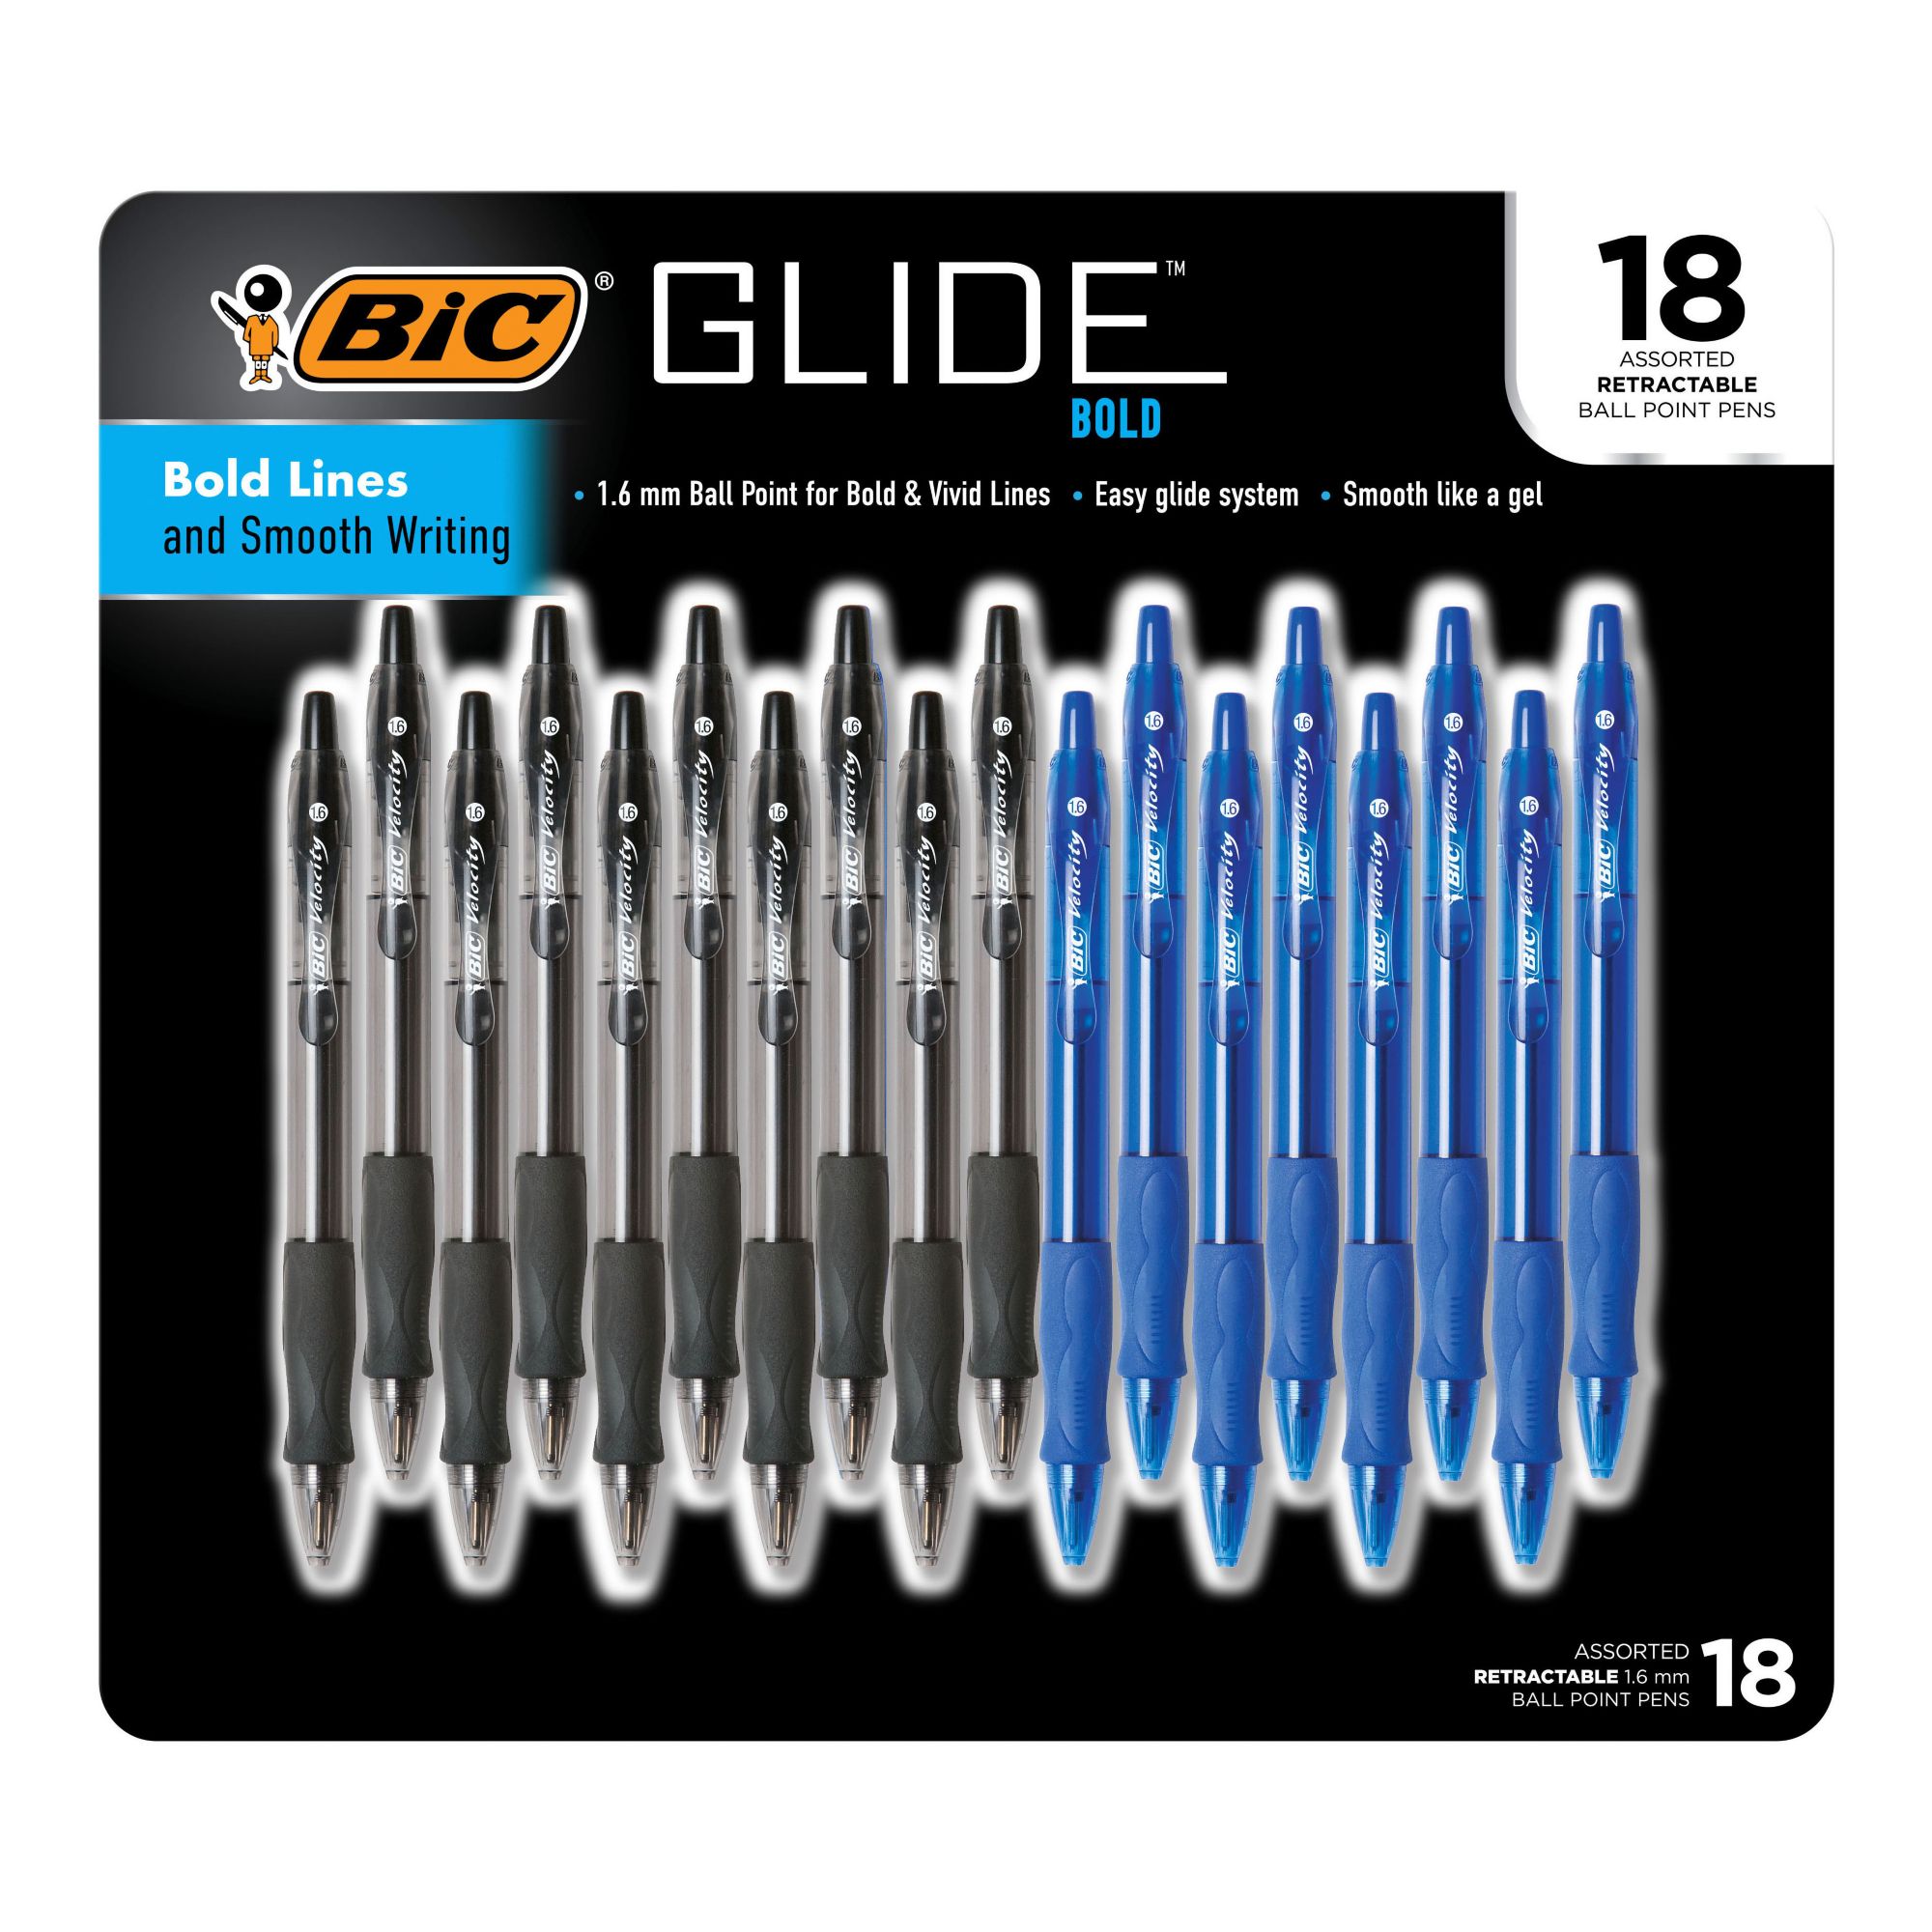 BIC Cristal Bold Ball Point Pen, 1.6 mm, Assorted Colors, 10 Count